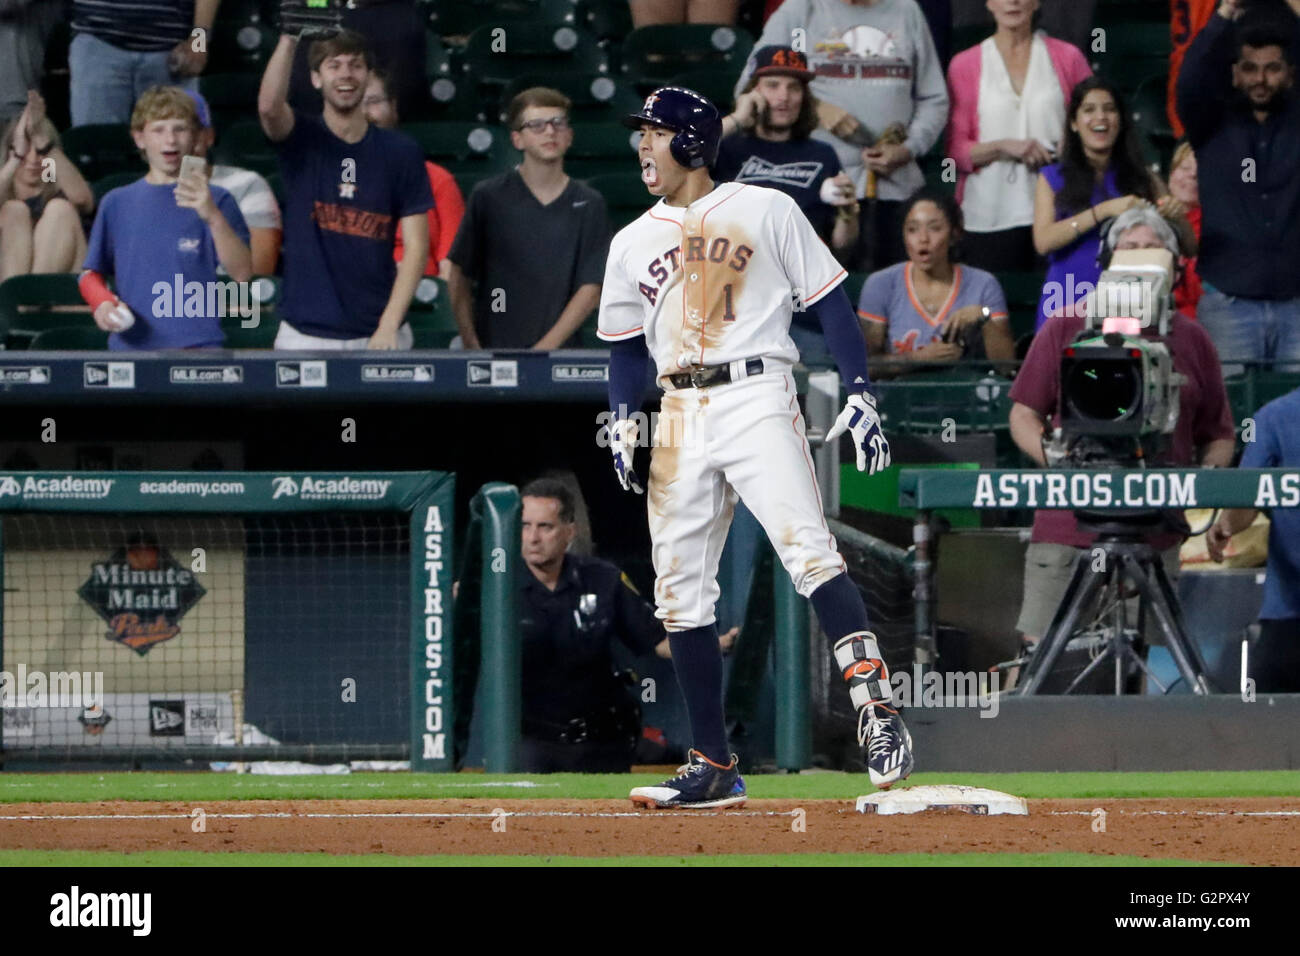 Houston, TX, USA. 1st June, 2016. Houston Astros shortstop Carlos Correa (1) celebrates after a triple during the Major League Baseball game between the Arizona Diamondbacks and the Houston Astros at Minute Maid Park in Houston, TX. The Astros defeated the Diamondbacks 5-4 in 11 innings Tim Warner/CSM/Alamy Live News Stock Photo